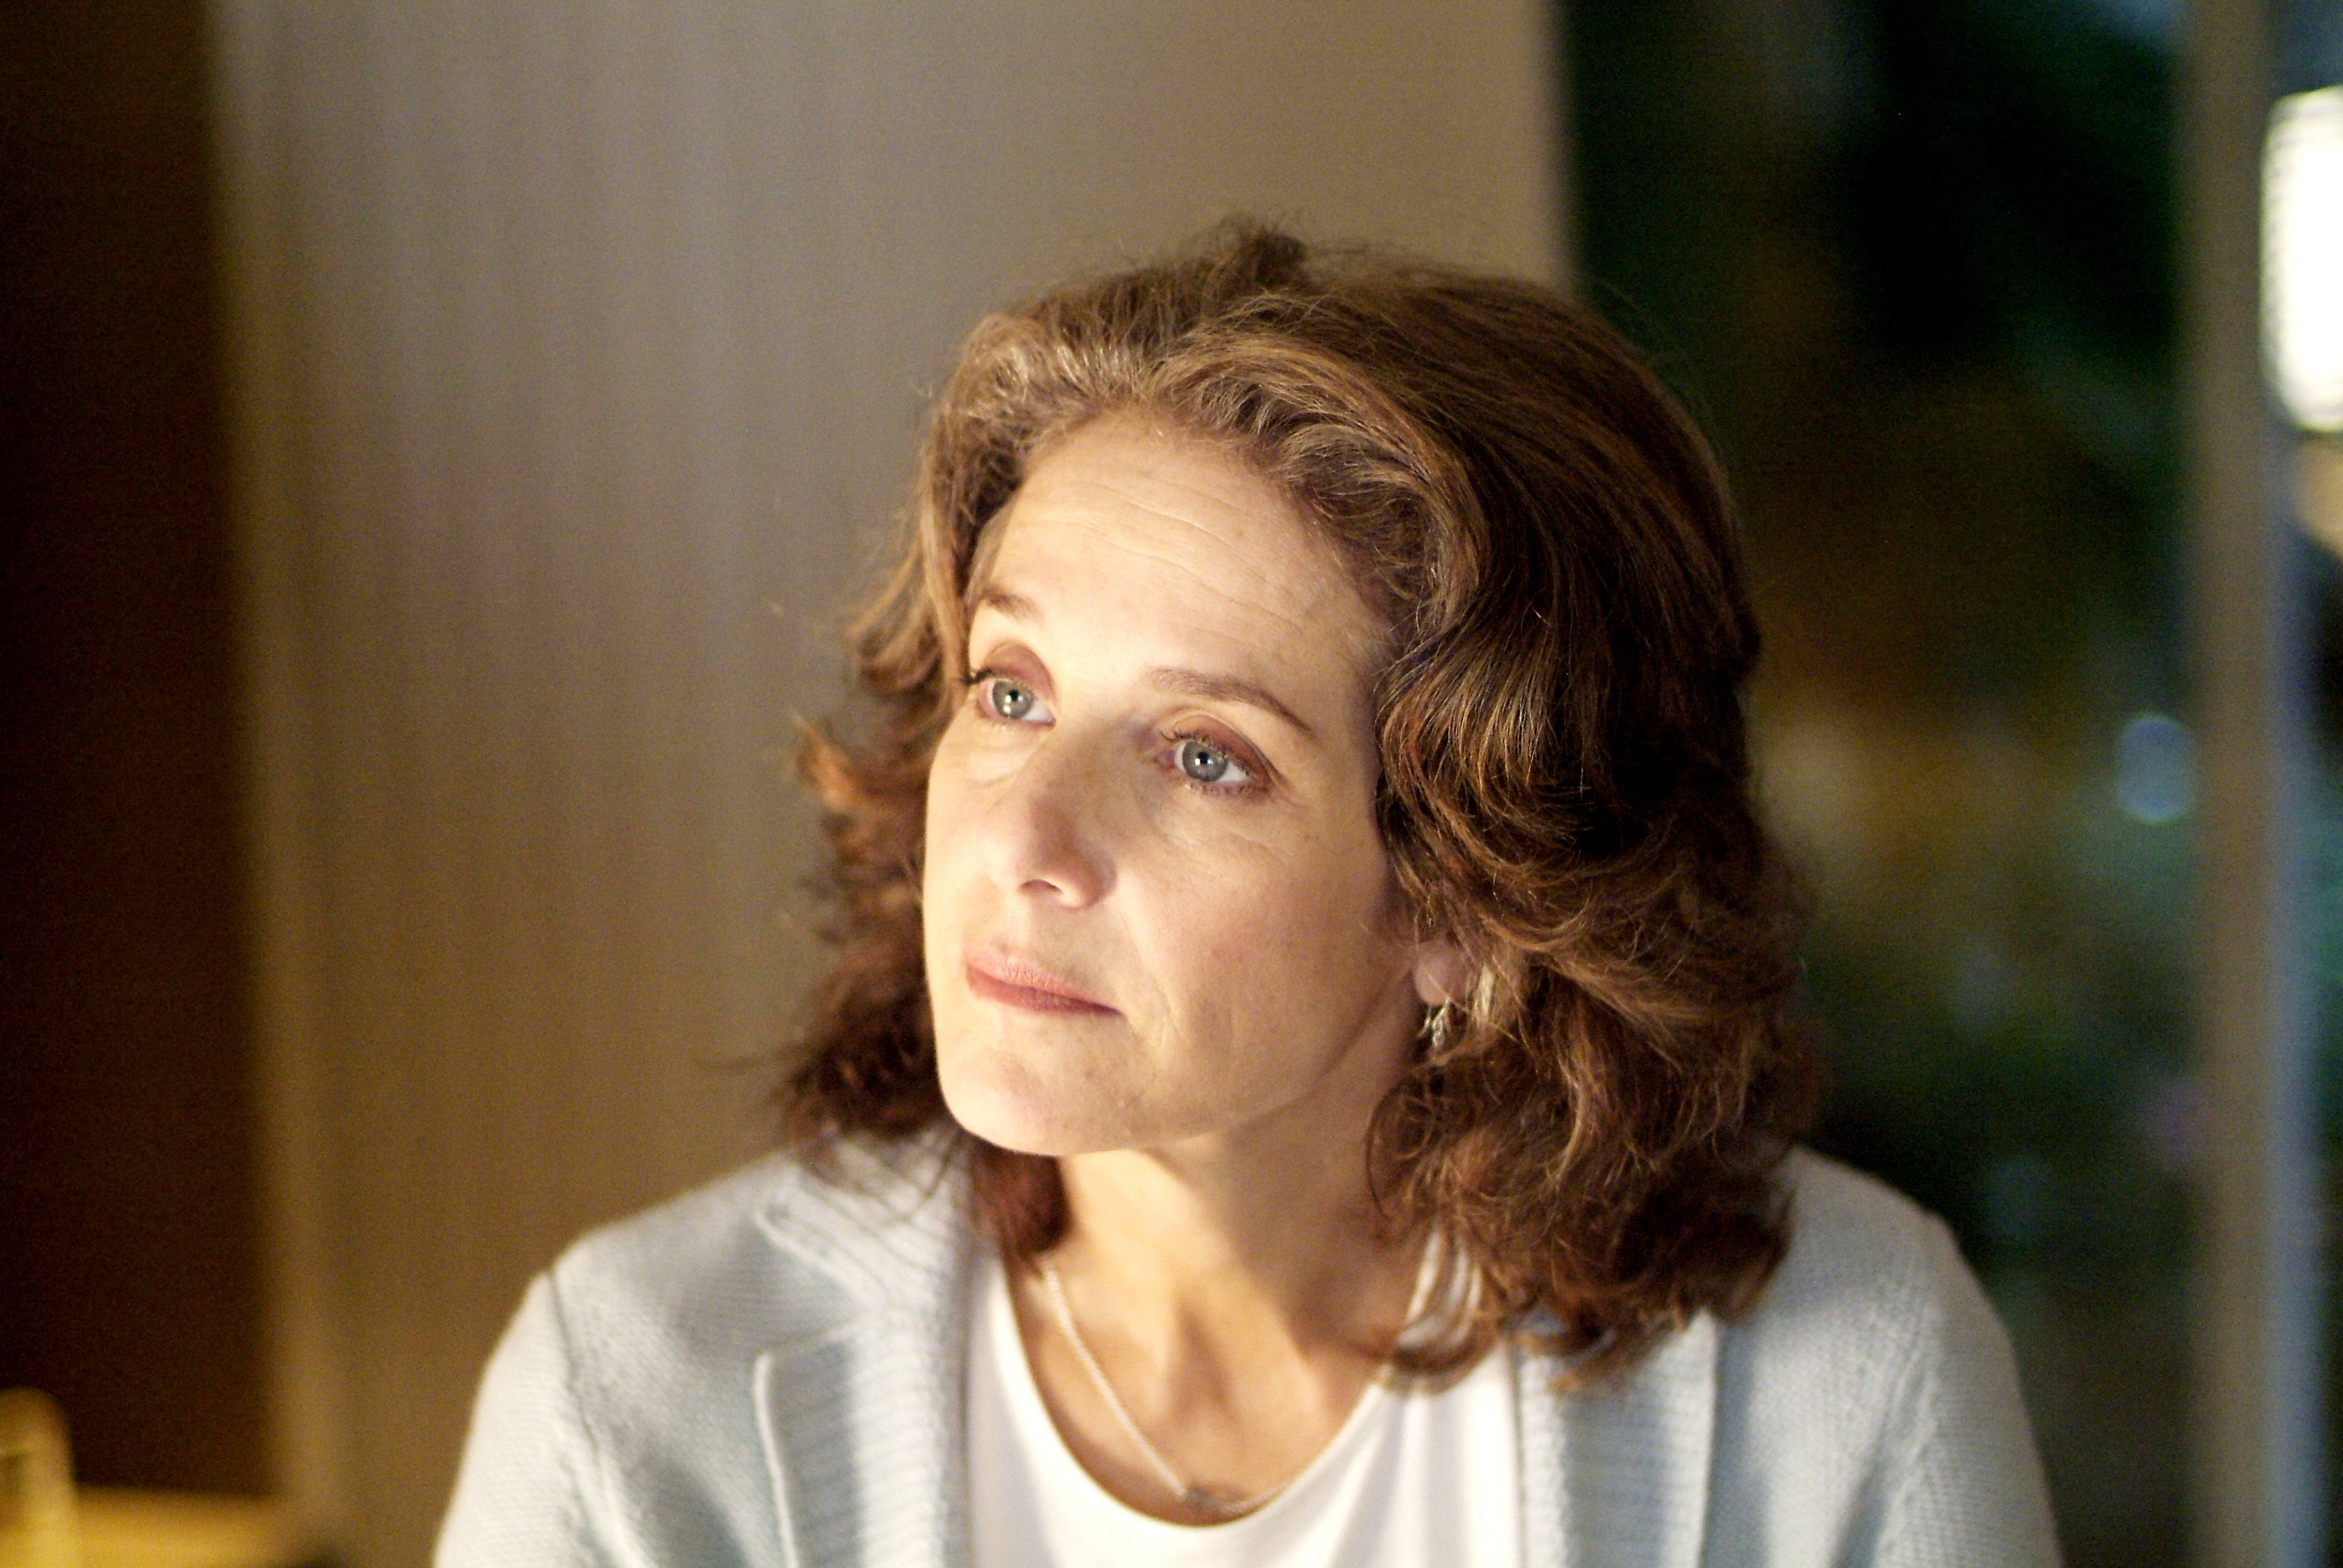 Debra Winger as Abby in Sony Pictures Classics' Rachel Getting Married (2008). Photo by Bob Vergara.